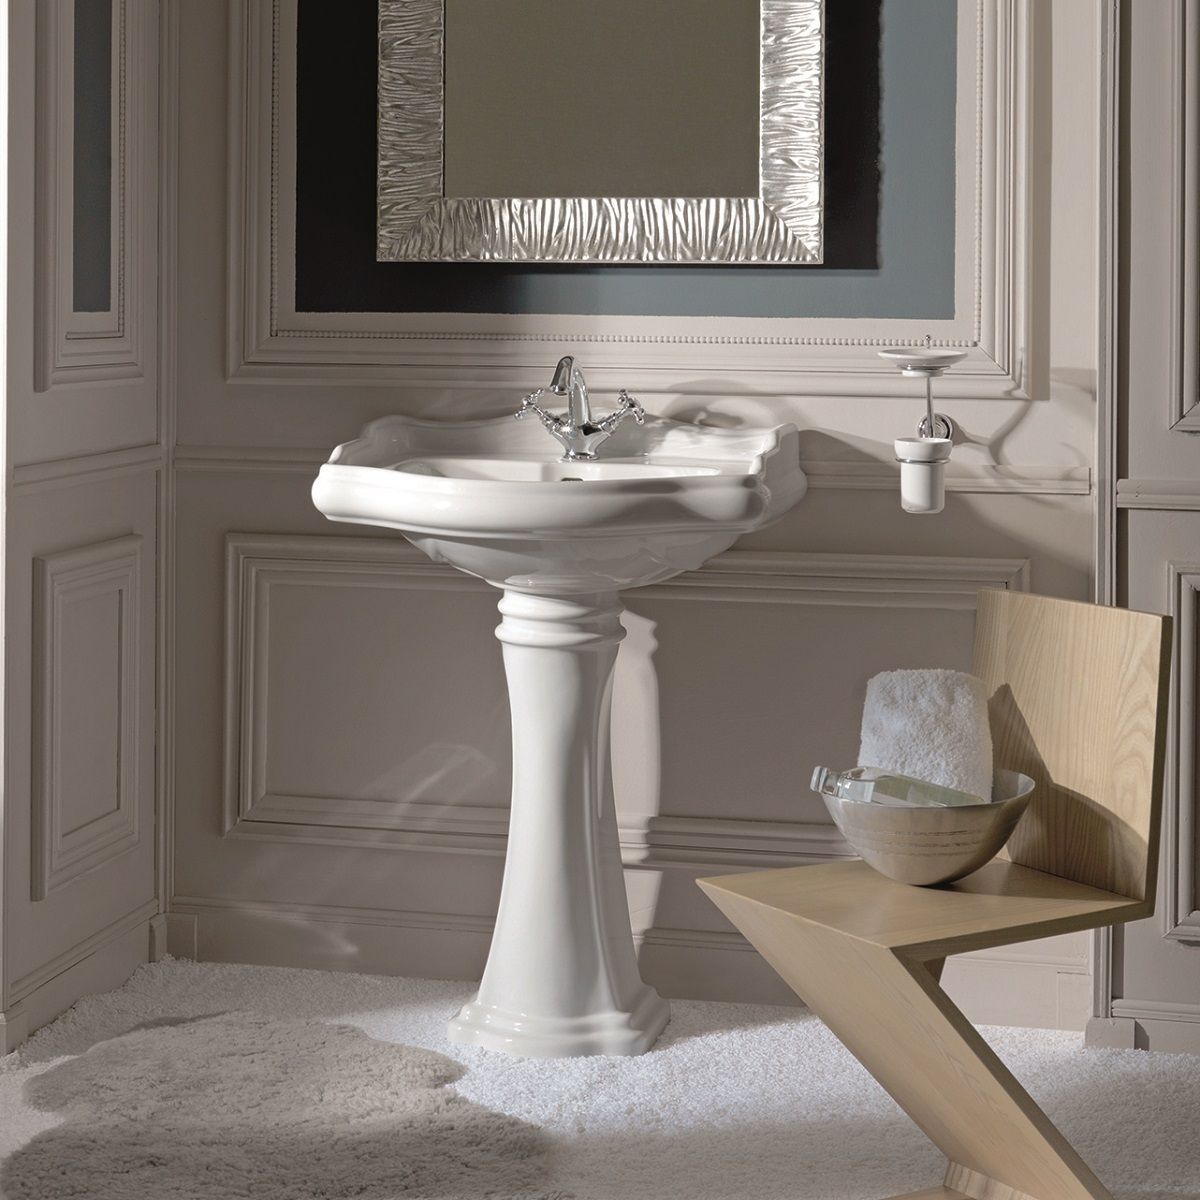 Position your Fixtures Optimally - Pedestal Sink